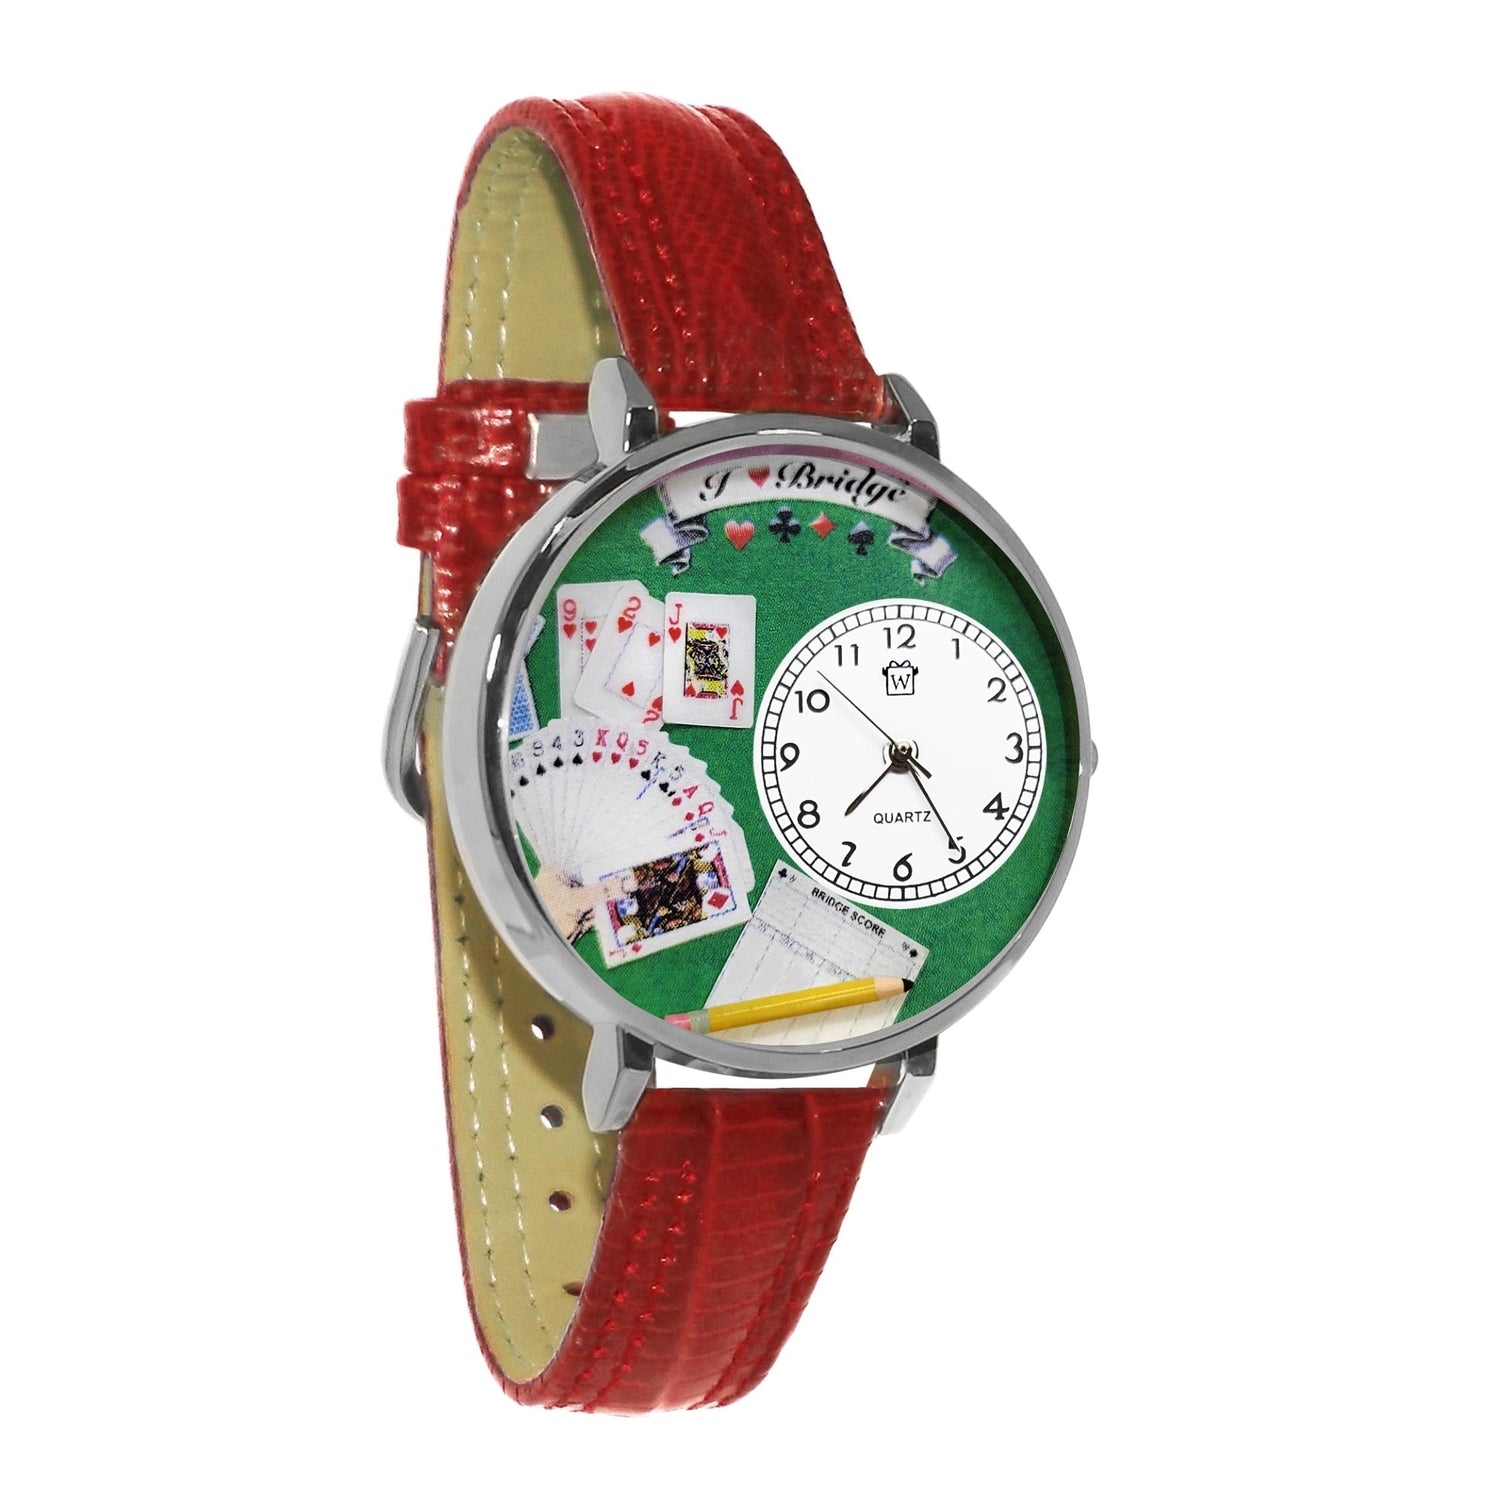 Whimsical Gifts | Bridge 3D Watch Large Style | Handmade in USA | Hobbies & Special Interests | Casino | Gaming | Game Night | Novelty Unique Fun Miniatures Gift | Silver Finish Red Leather Watch Band